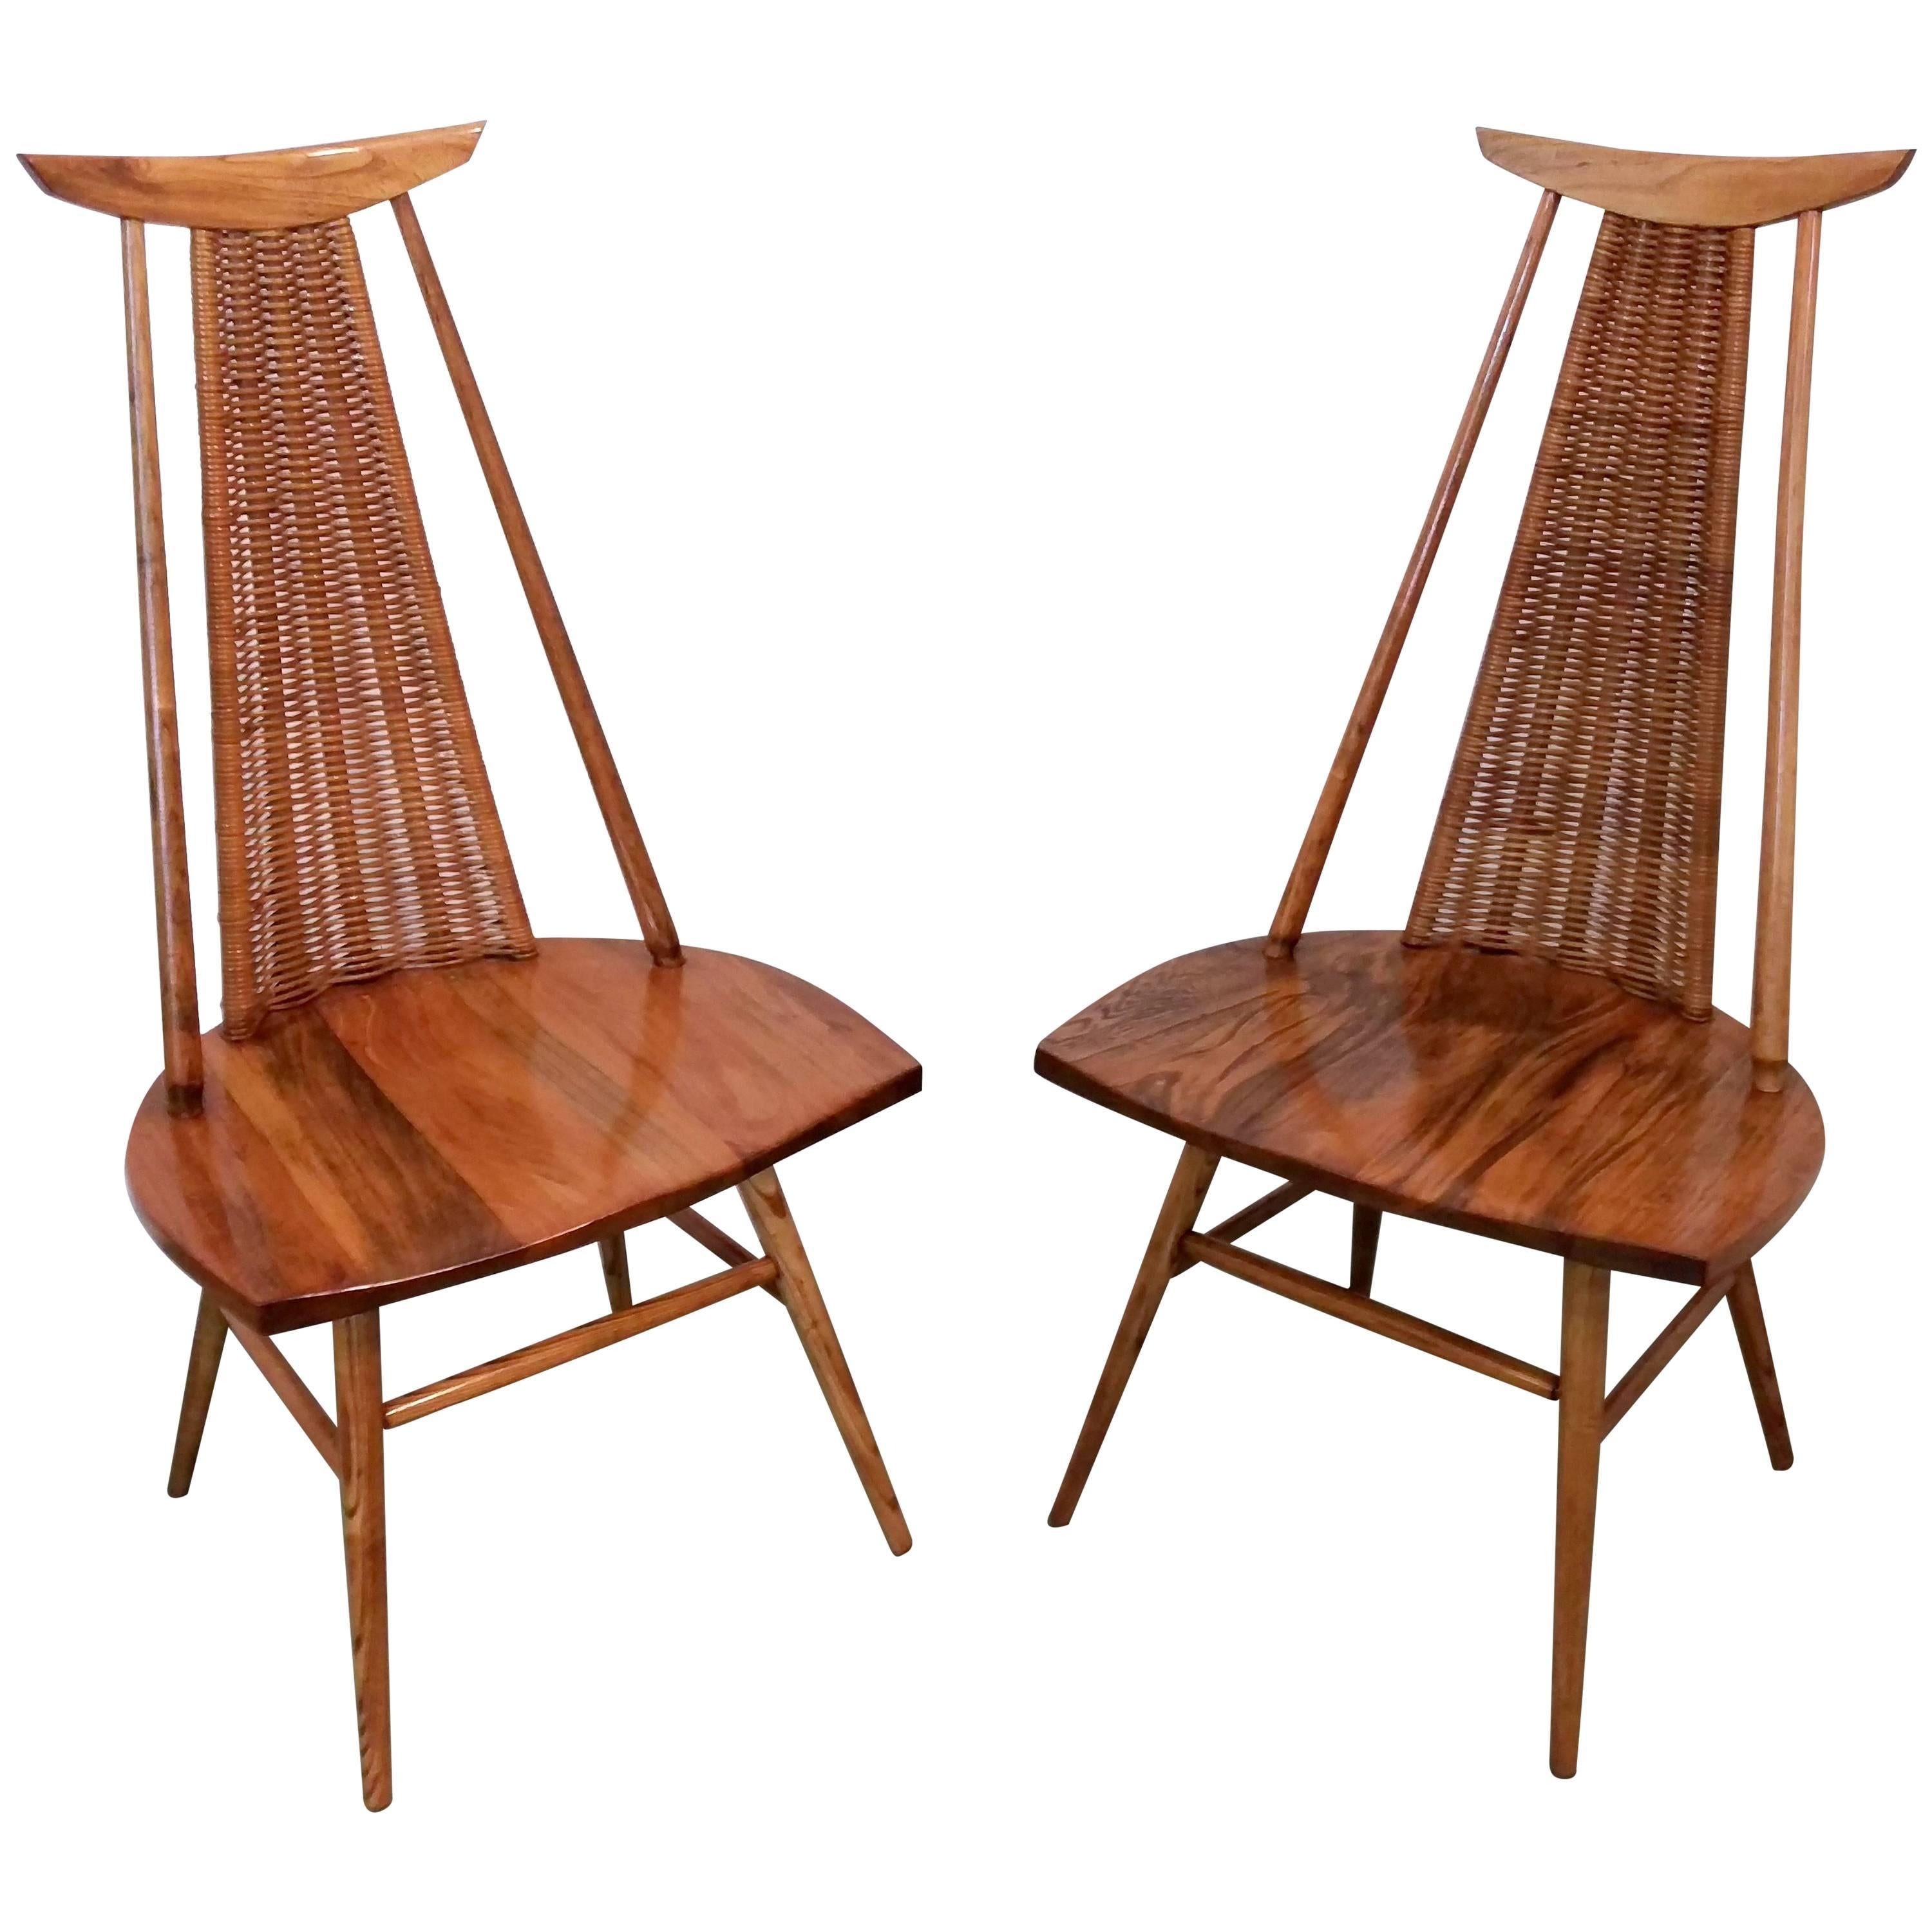 Rare Pair of Sculptural Easy Chairs by Ilmari Tapiovaara, Offered by La Porte For Sale